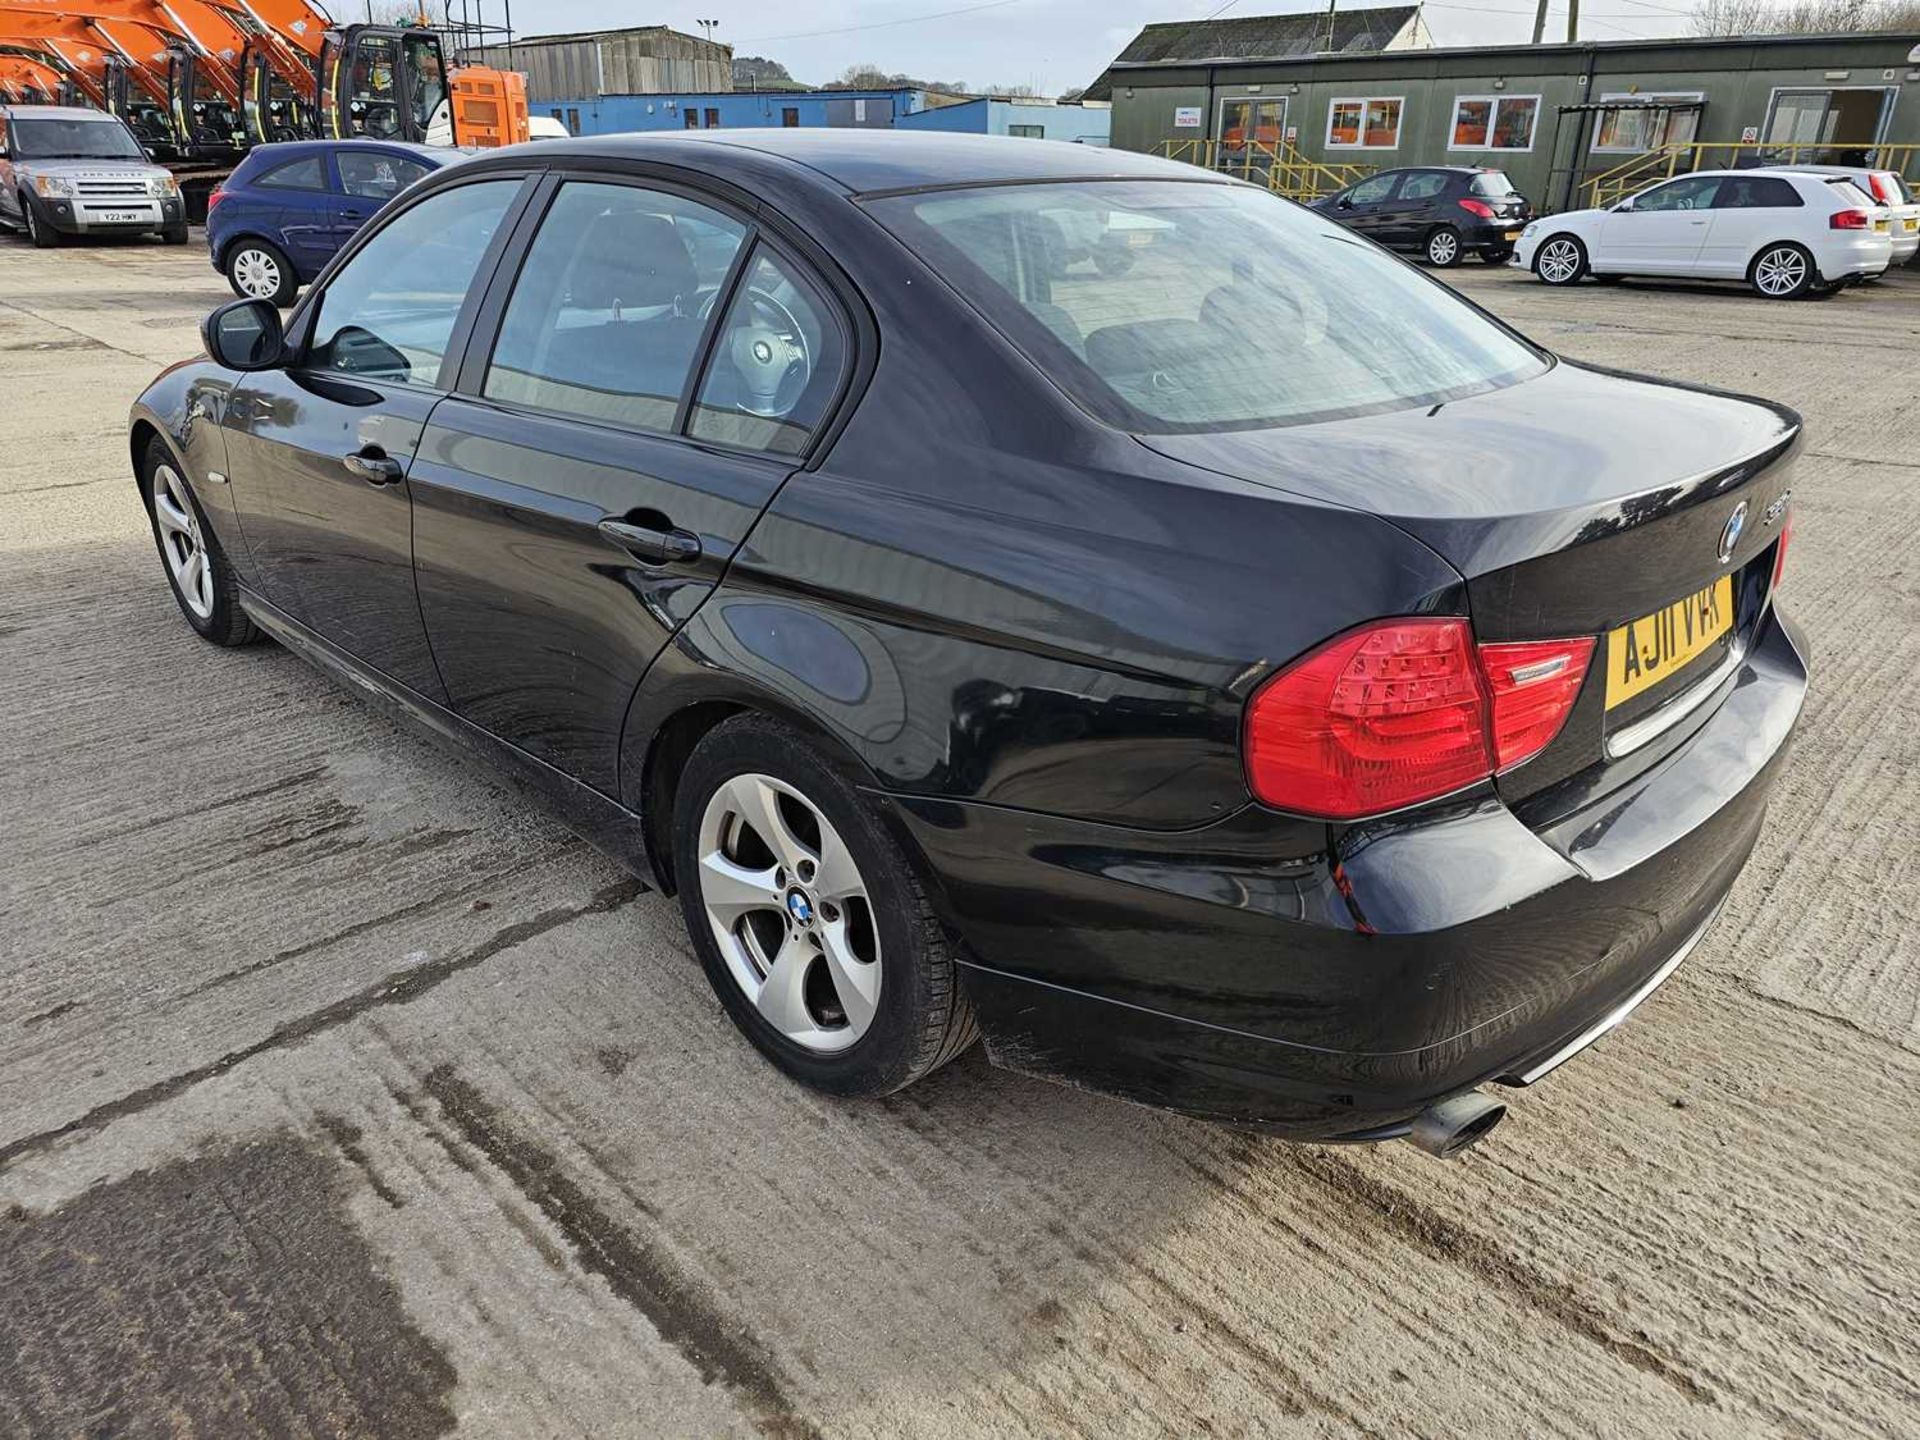 2011 BMW 320D, 6 Speed, Parking Sensors, Bluetooth, A/C (Reg. Docs. Available, Tested 01/25) - Image 2 of 28